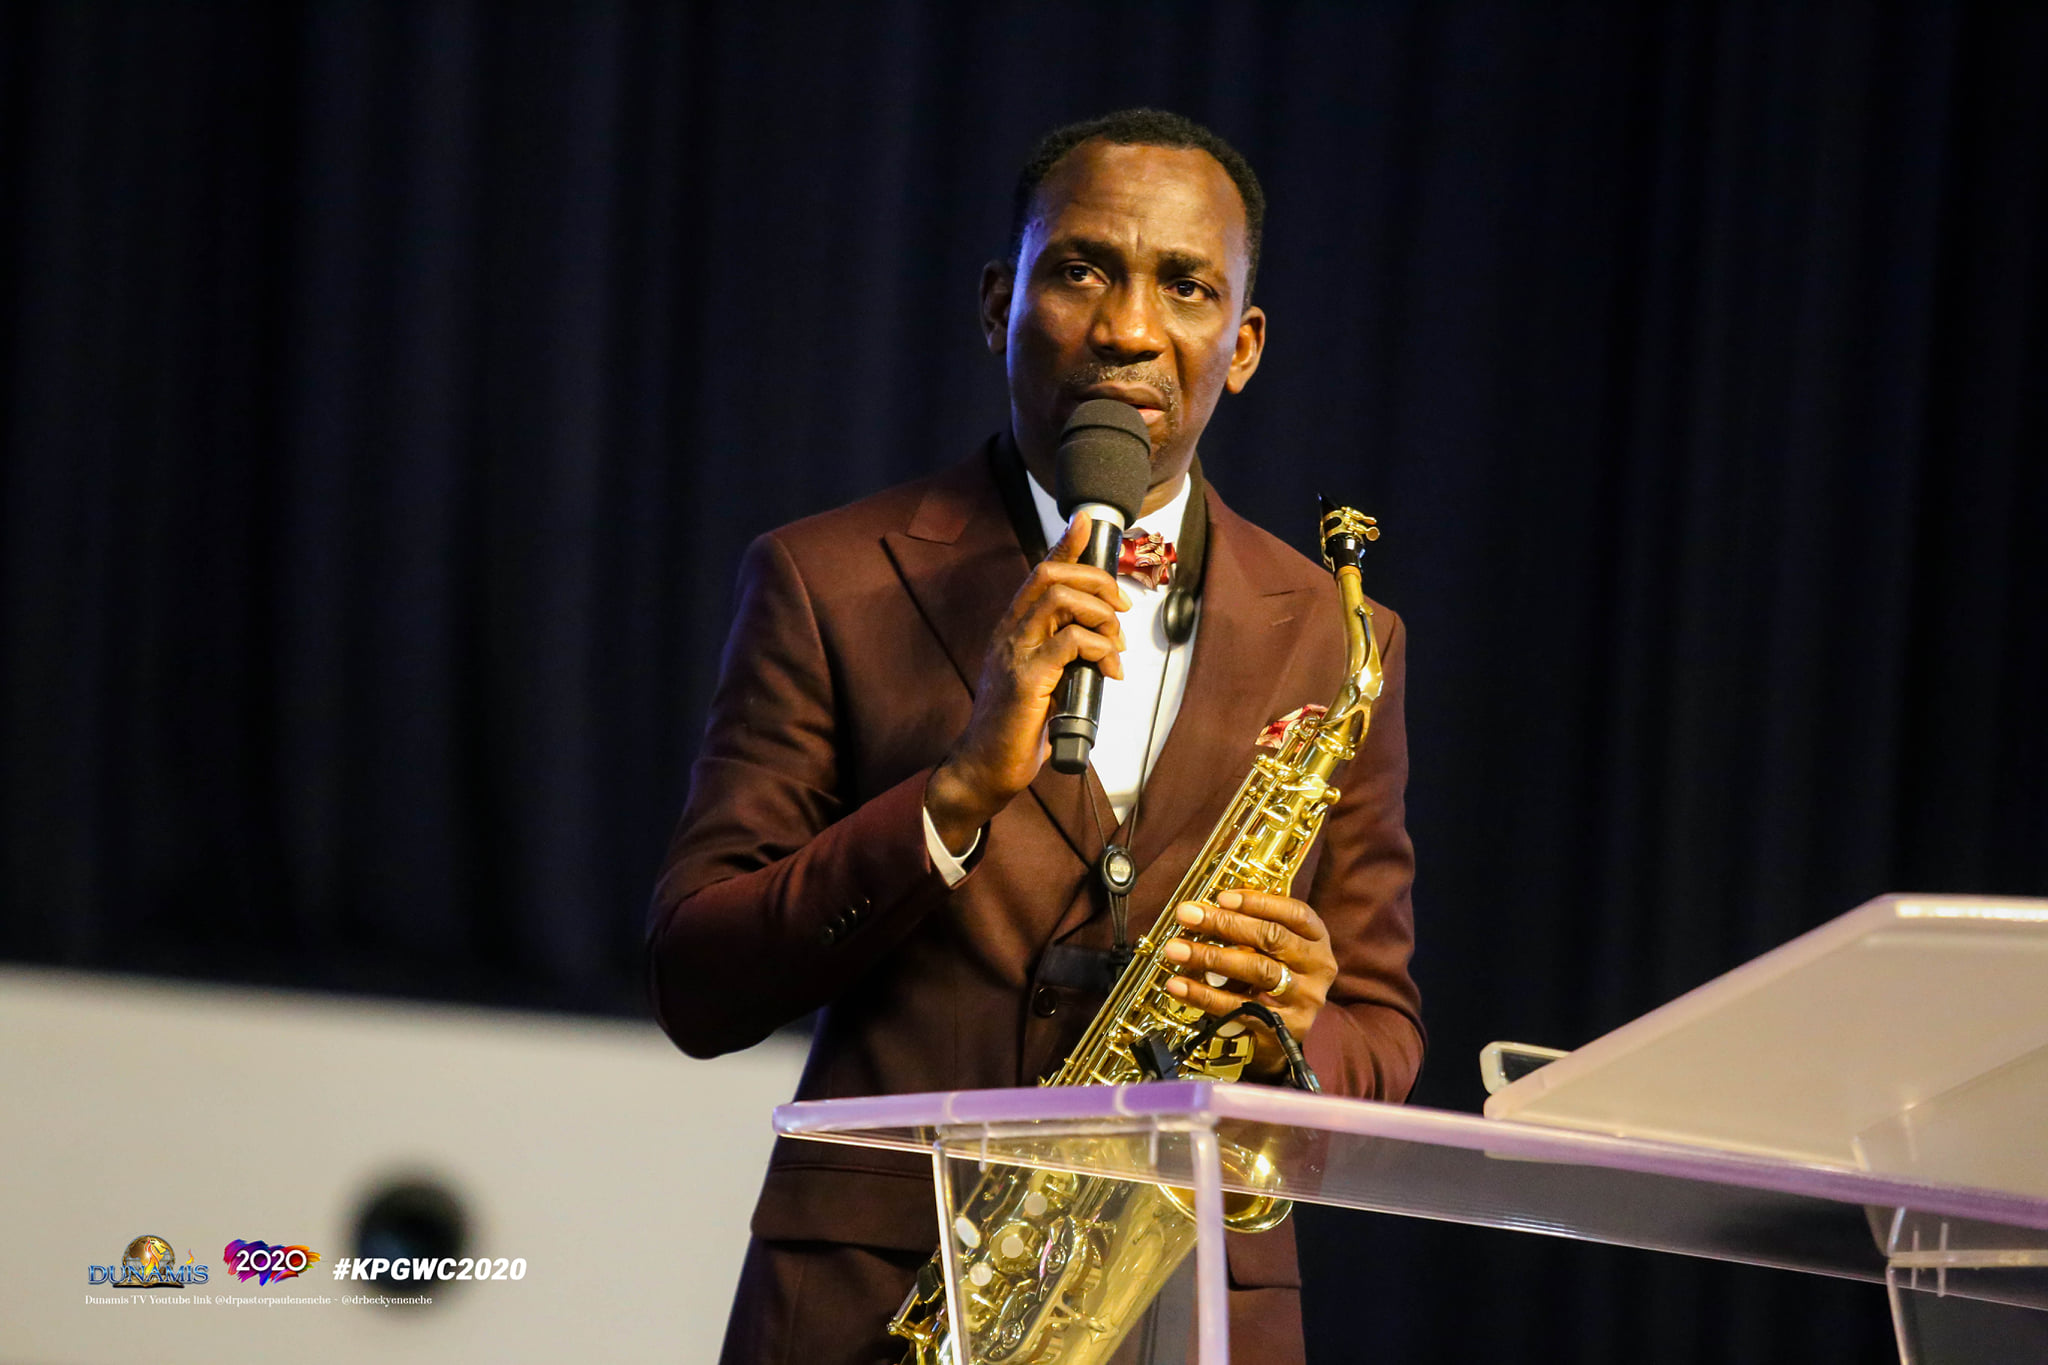 Dr. Paul Enenche Ft Benny Ebute - I'll Waste My Life mp3